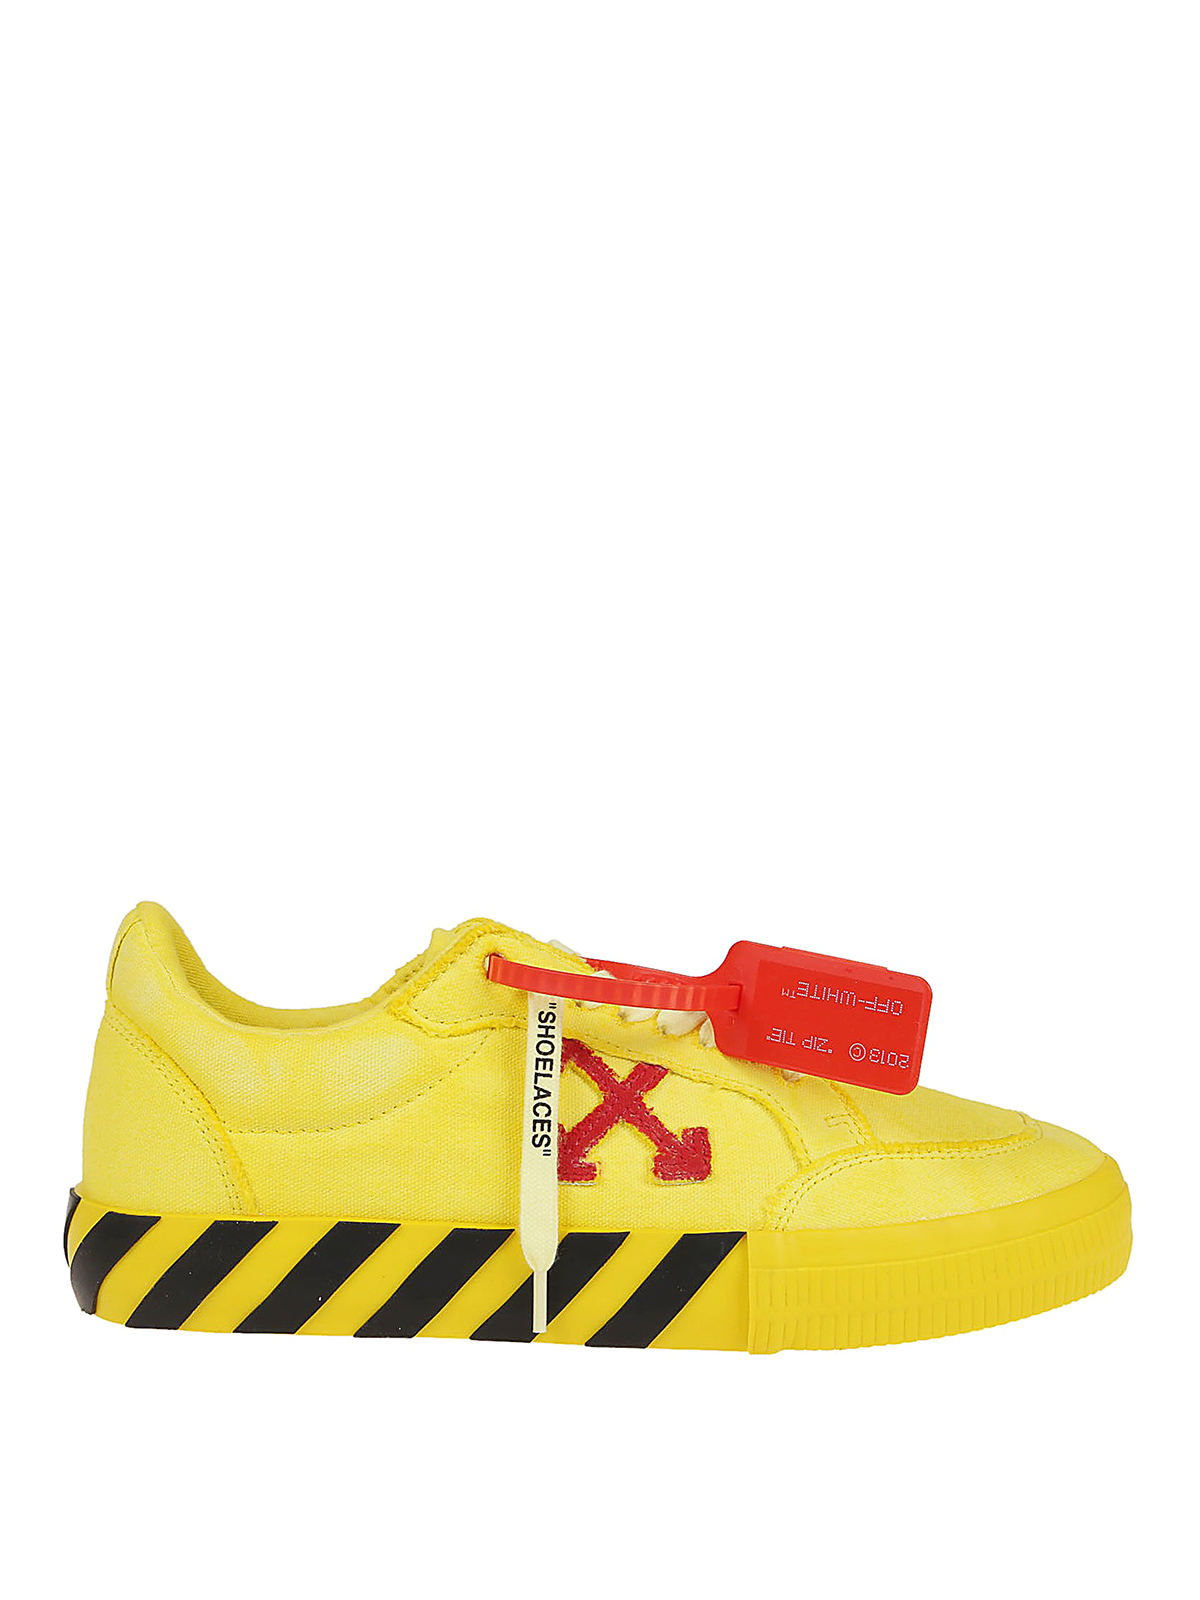 Off-White - Sneaker Low Vulcanized gialle - sneakers - OMIA085R20D330506020